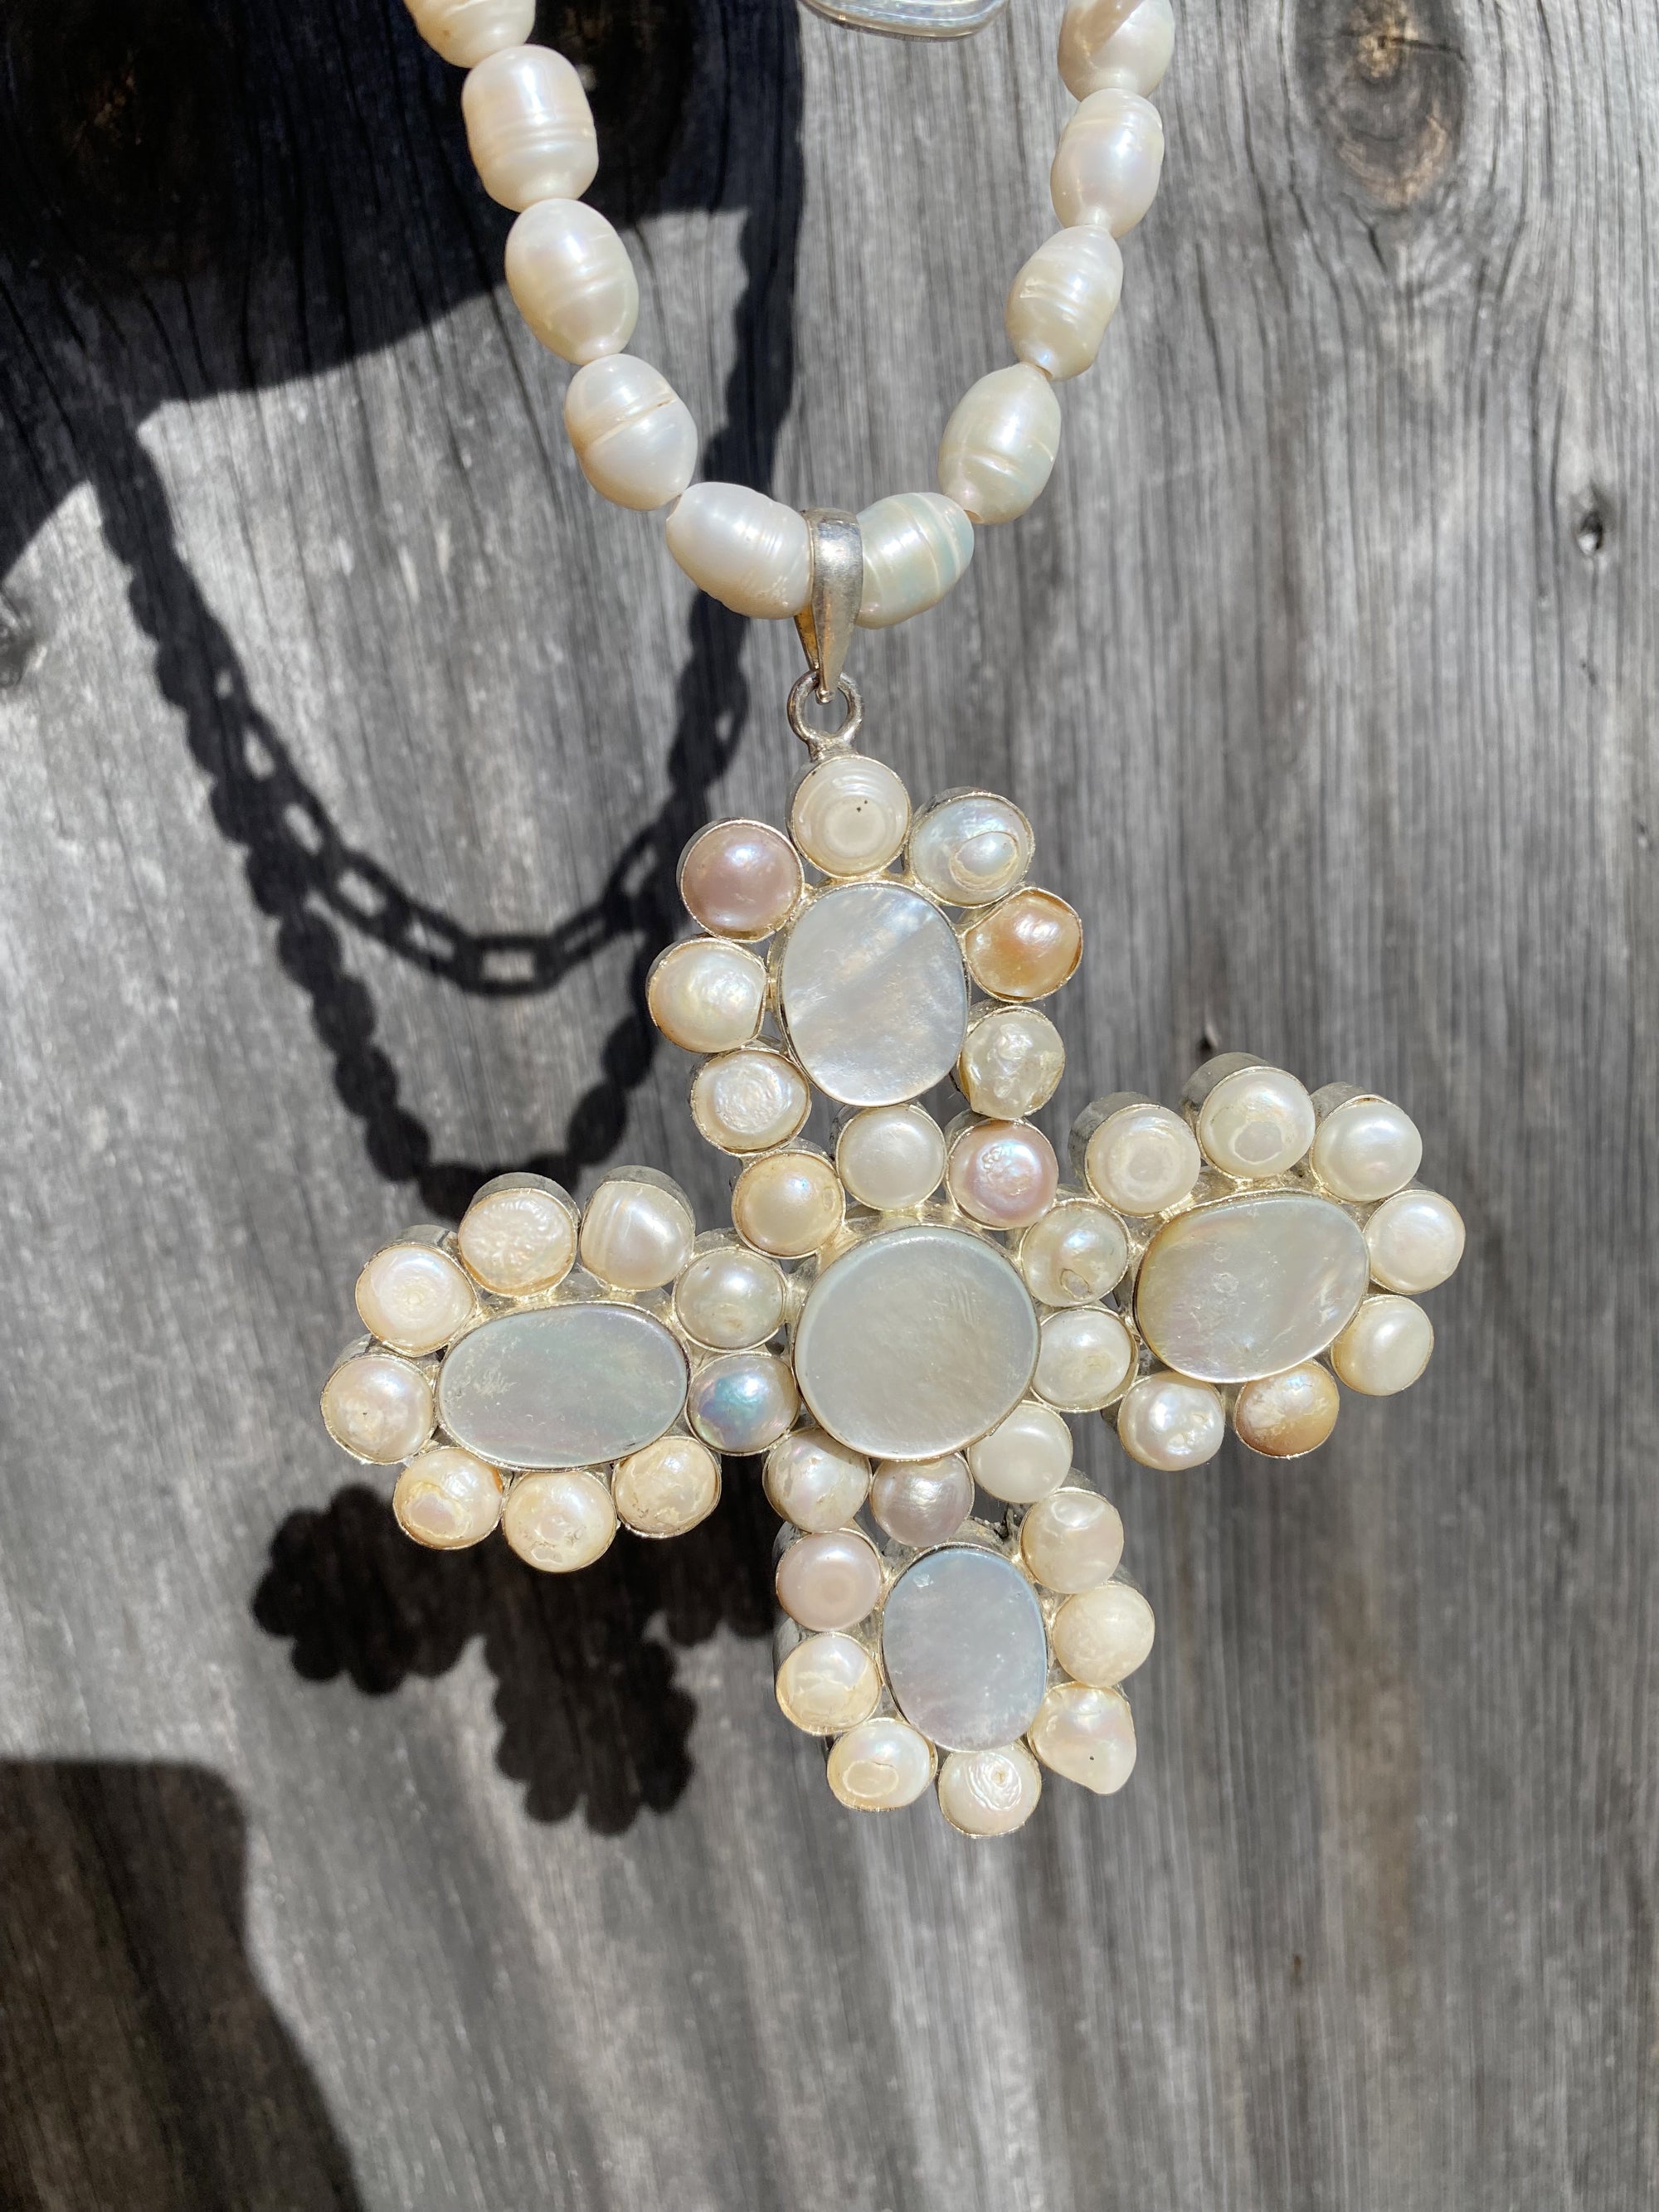 Pearl cross pendant necklace by Jenny Dayco 9